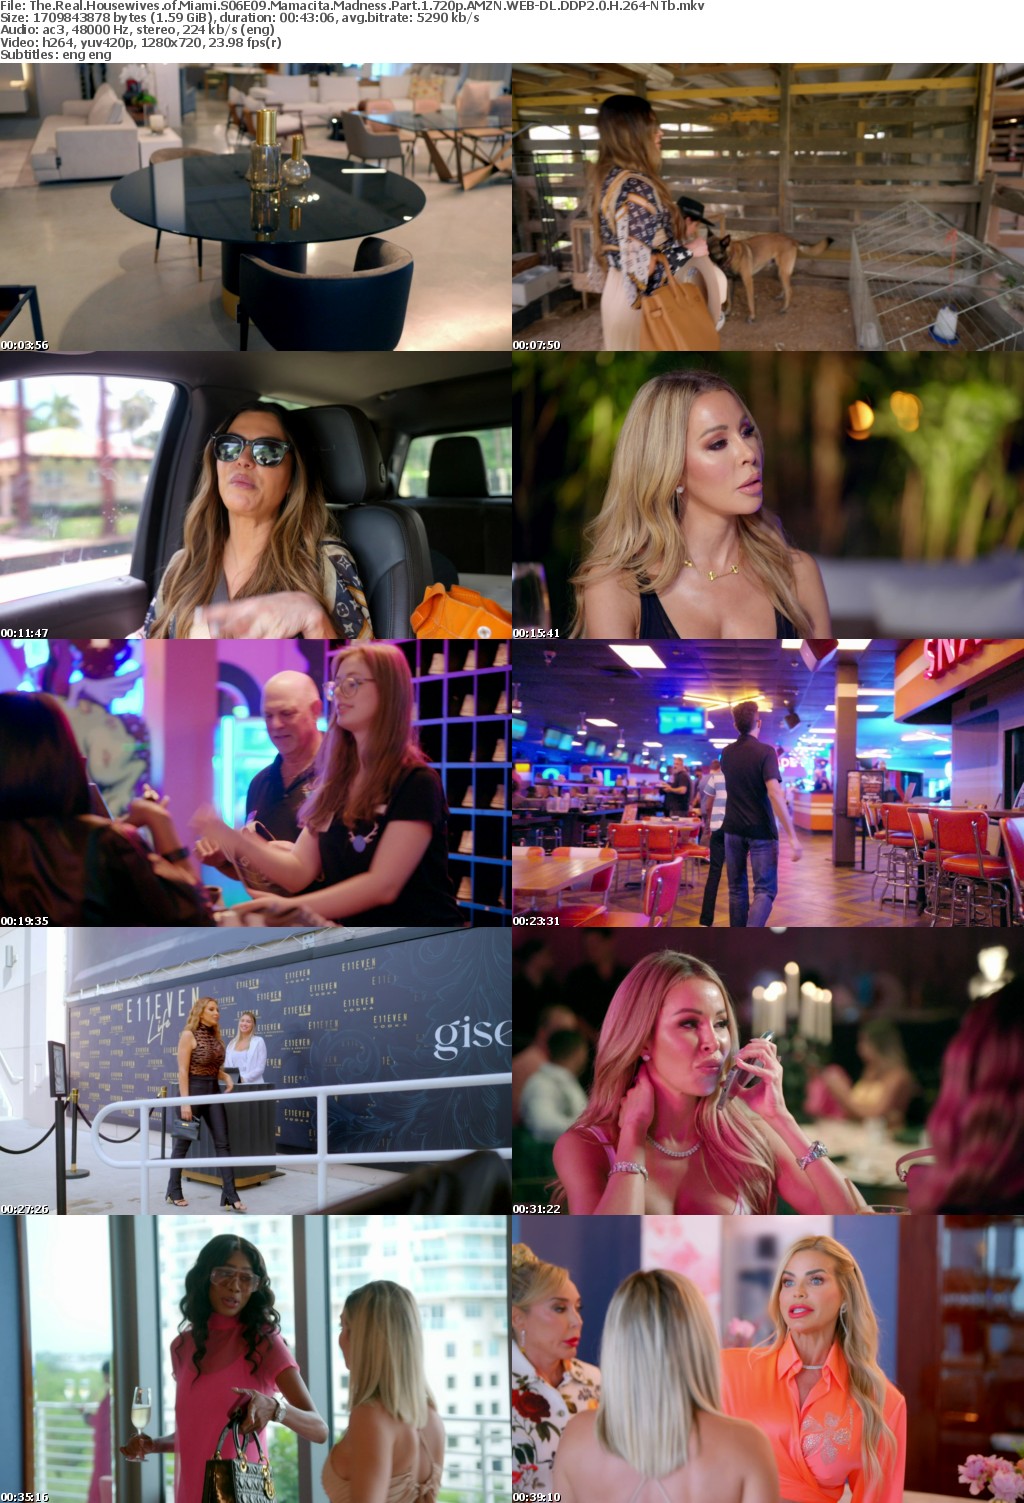 The Real Housewives of Miami S06E09 Mamacita Madness Part 1 720p AMZN WEB-DL DDP2 0 H 264-NTb